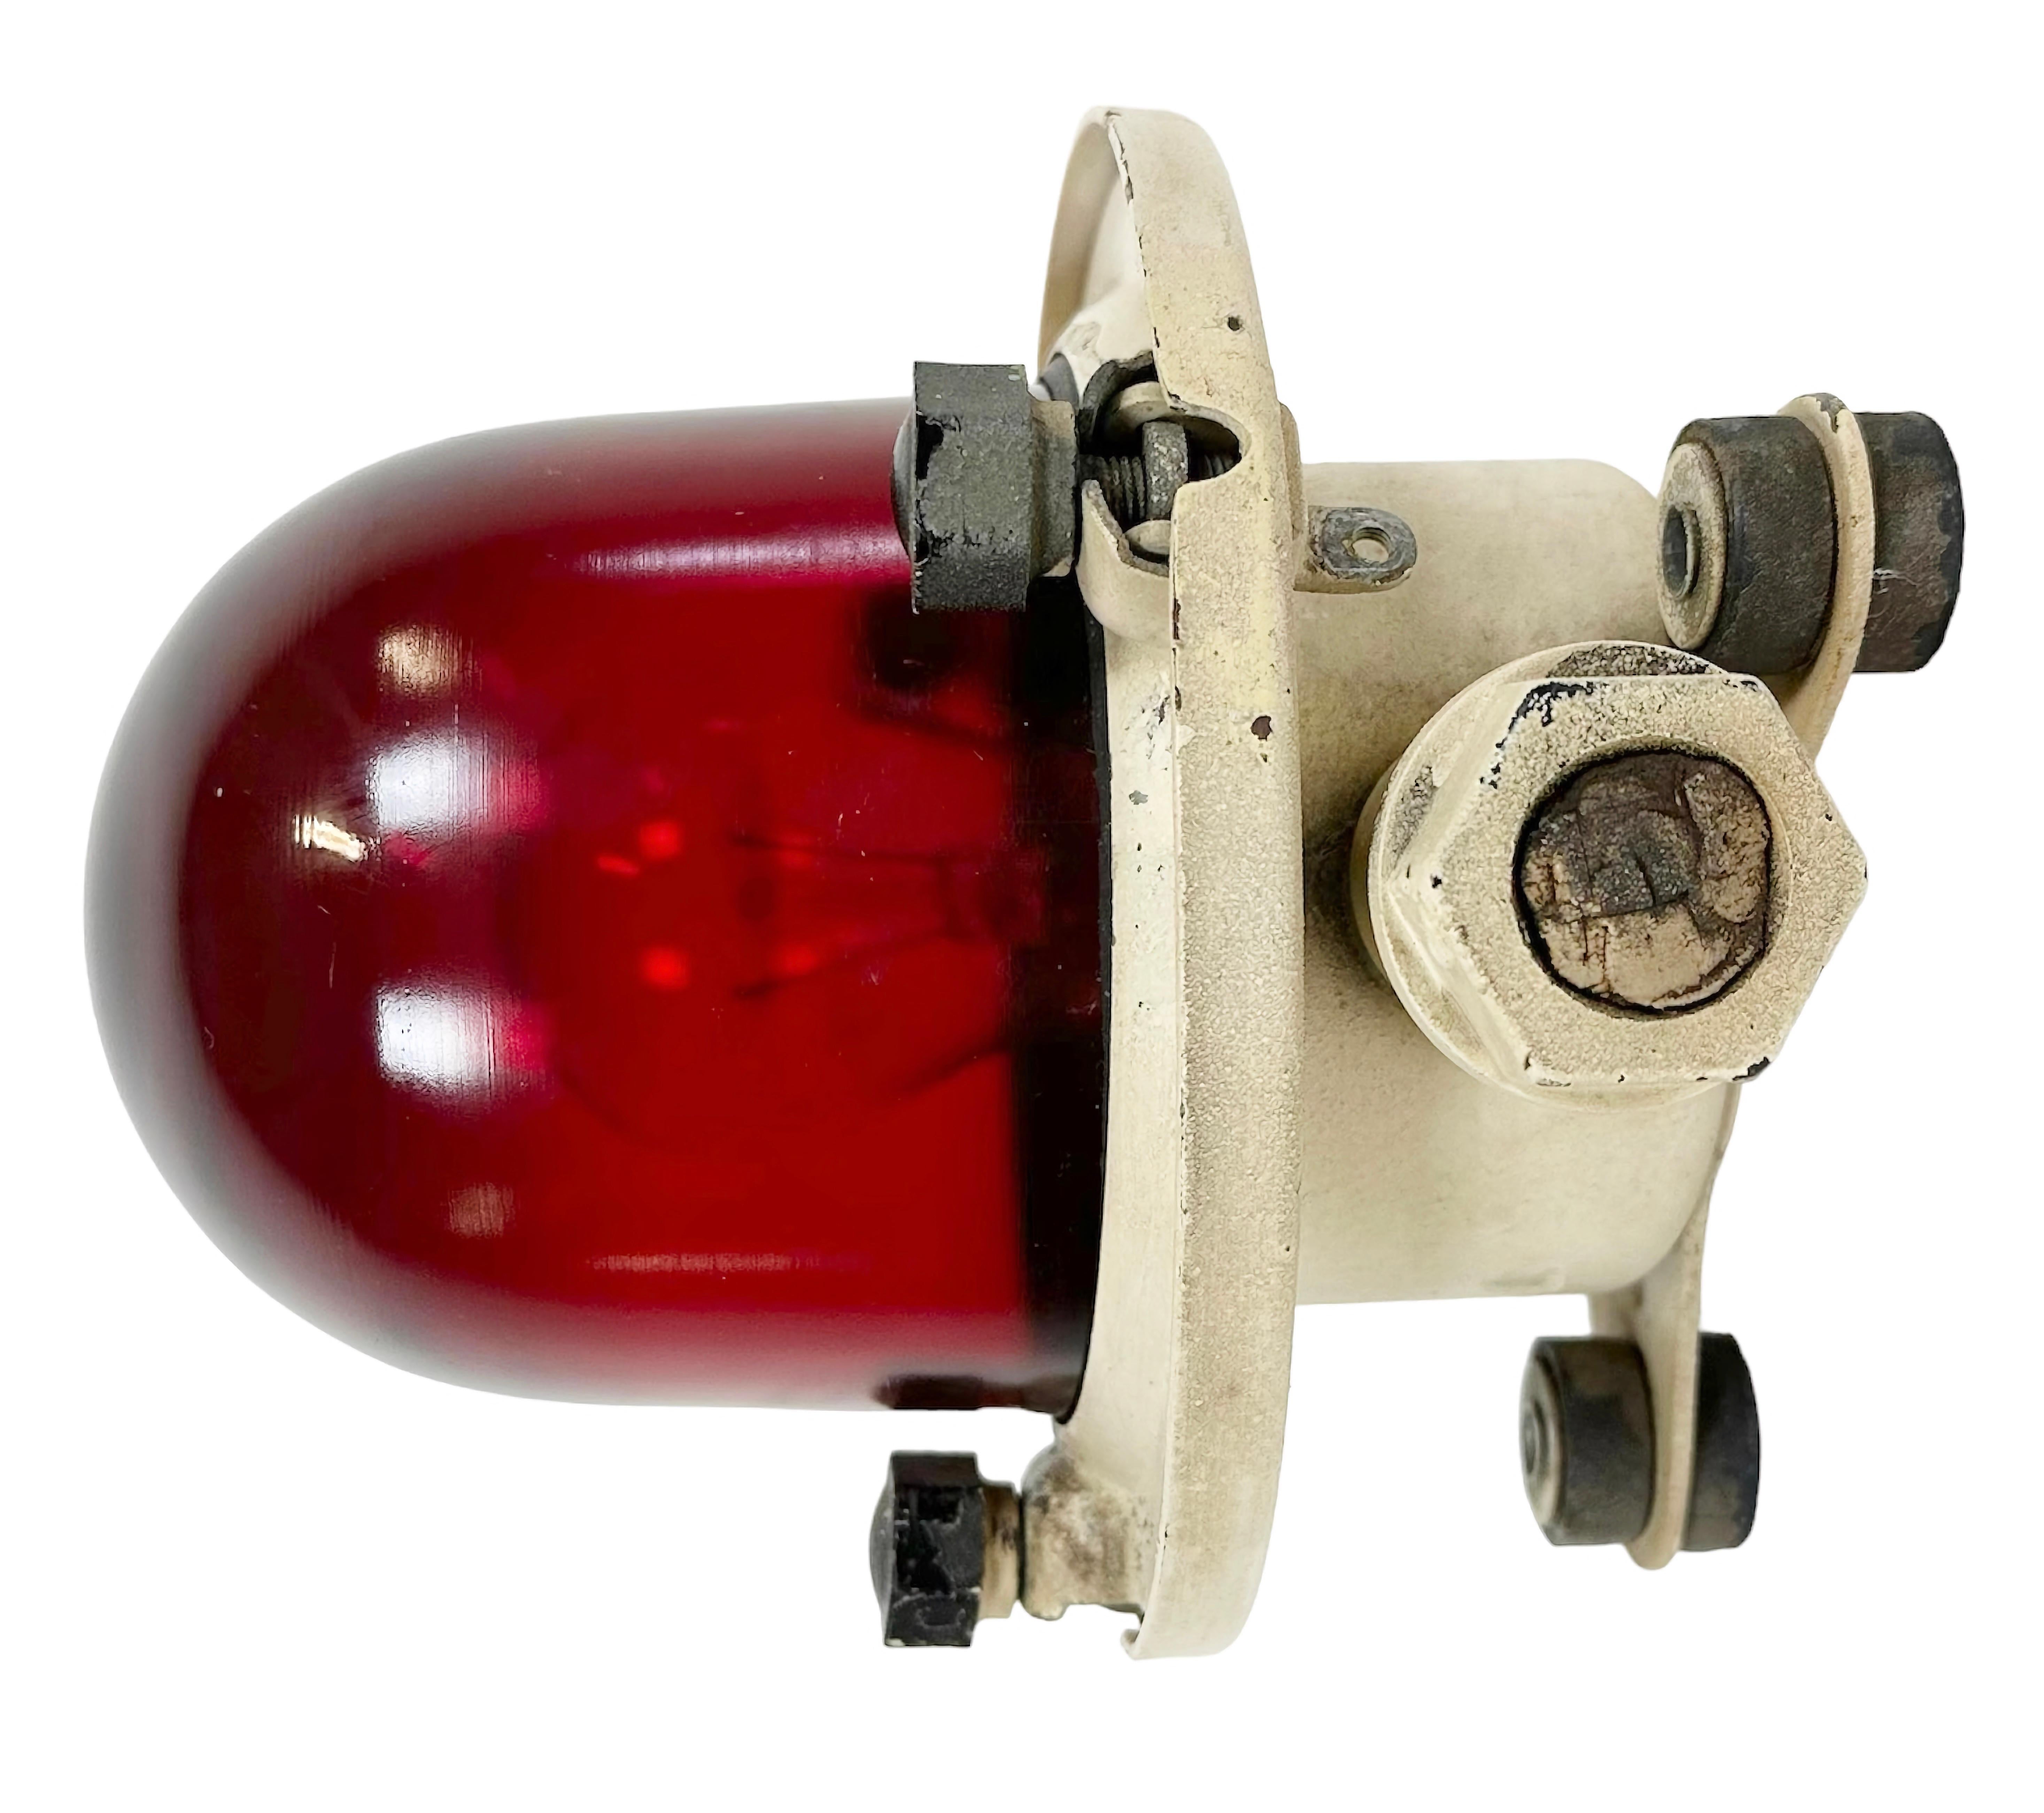 Vintage industrial celing or wall light made in former Soviet Union during the 1960s. It features a beige metal body and a red glass cover. The socket requires E 27/ E 26 light bulbs. New wire. The diameter of the lamp is 17cm. The weight of the